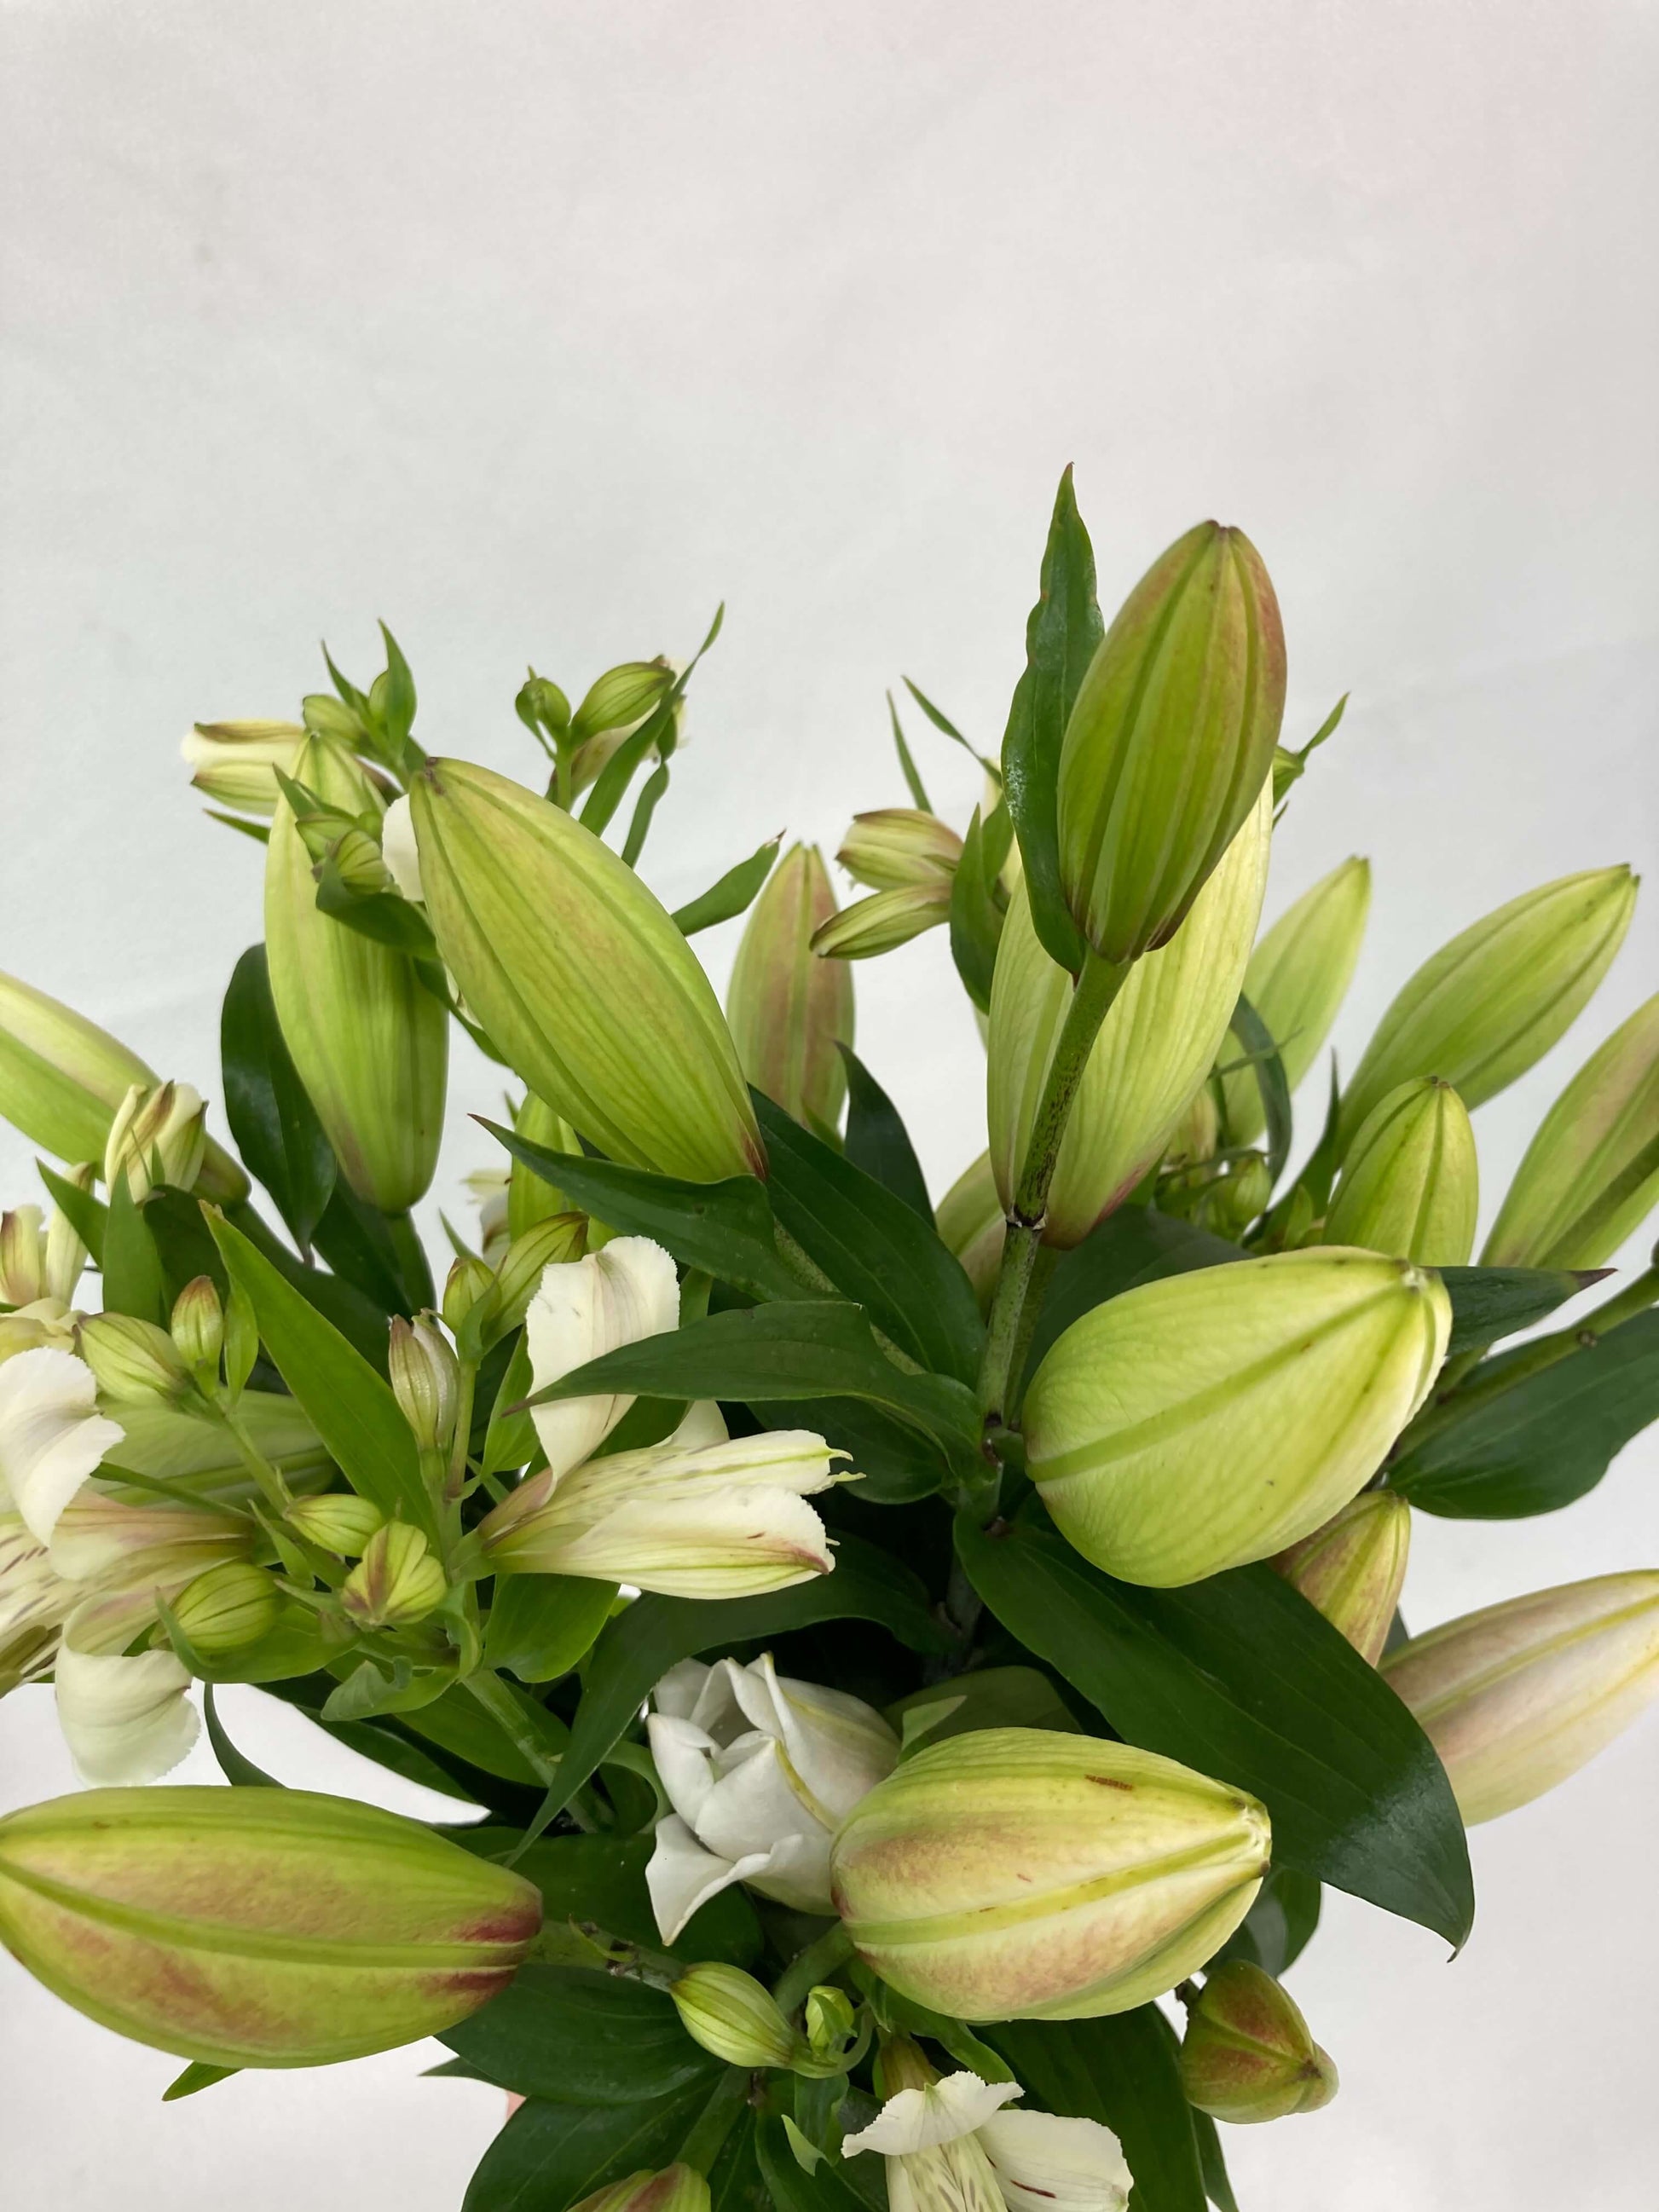 White lilies with alstroemeria up close.